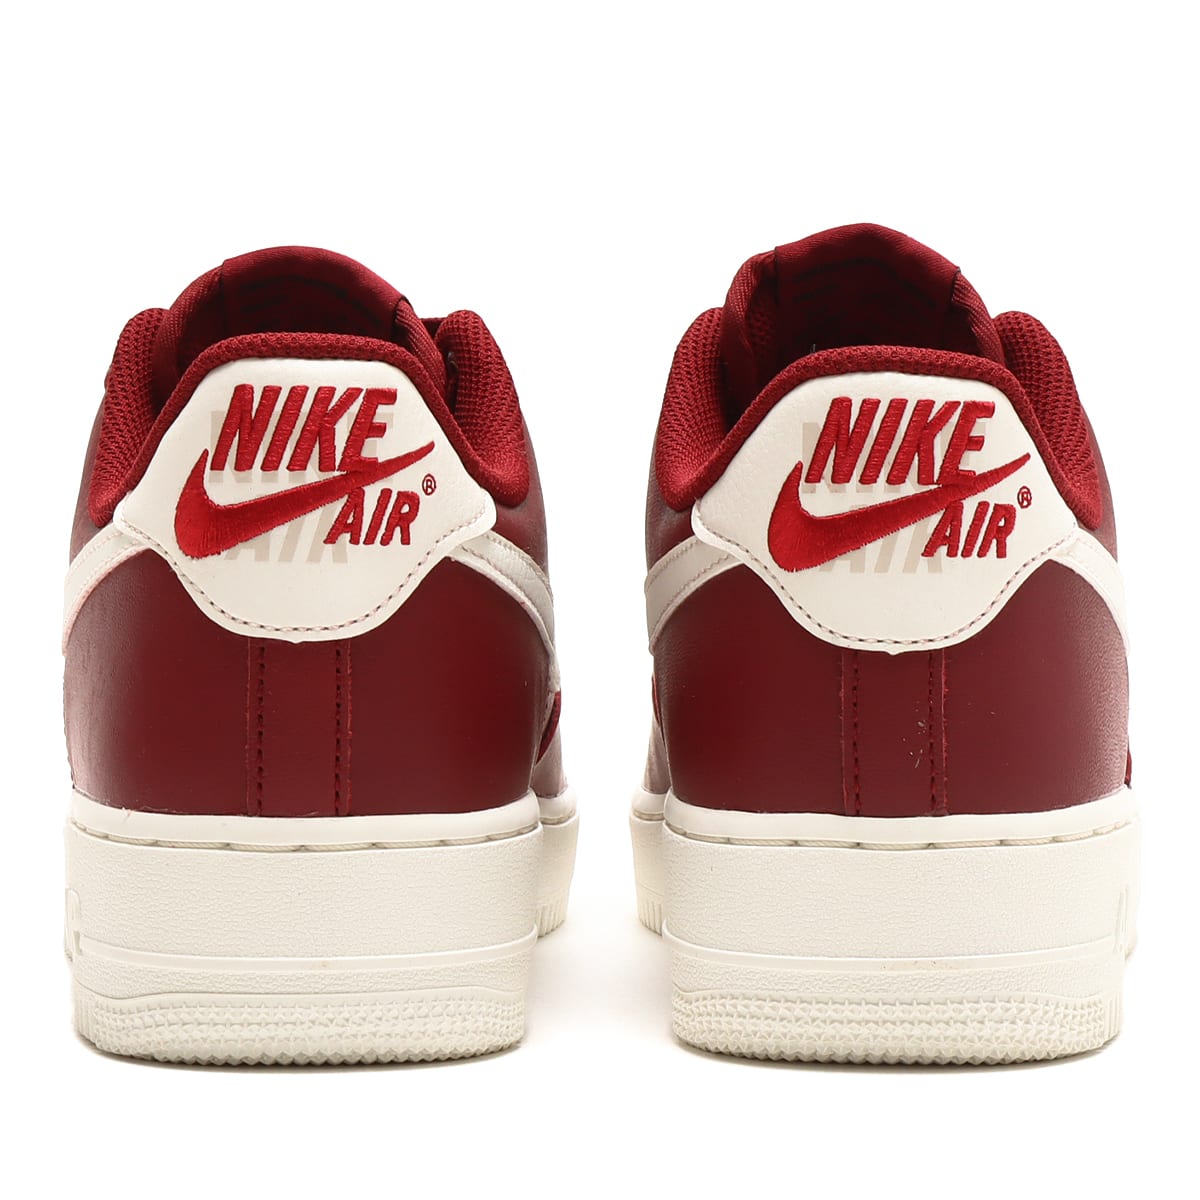 NIKE AIR FORCE 1 '07 PRM TEAM RED/SAIL-GYM RED-TEAM RED 22HO-I